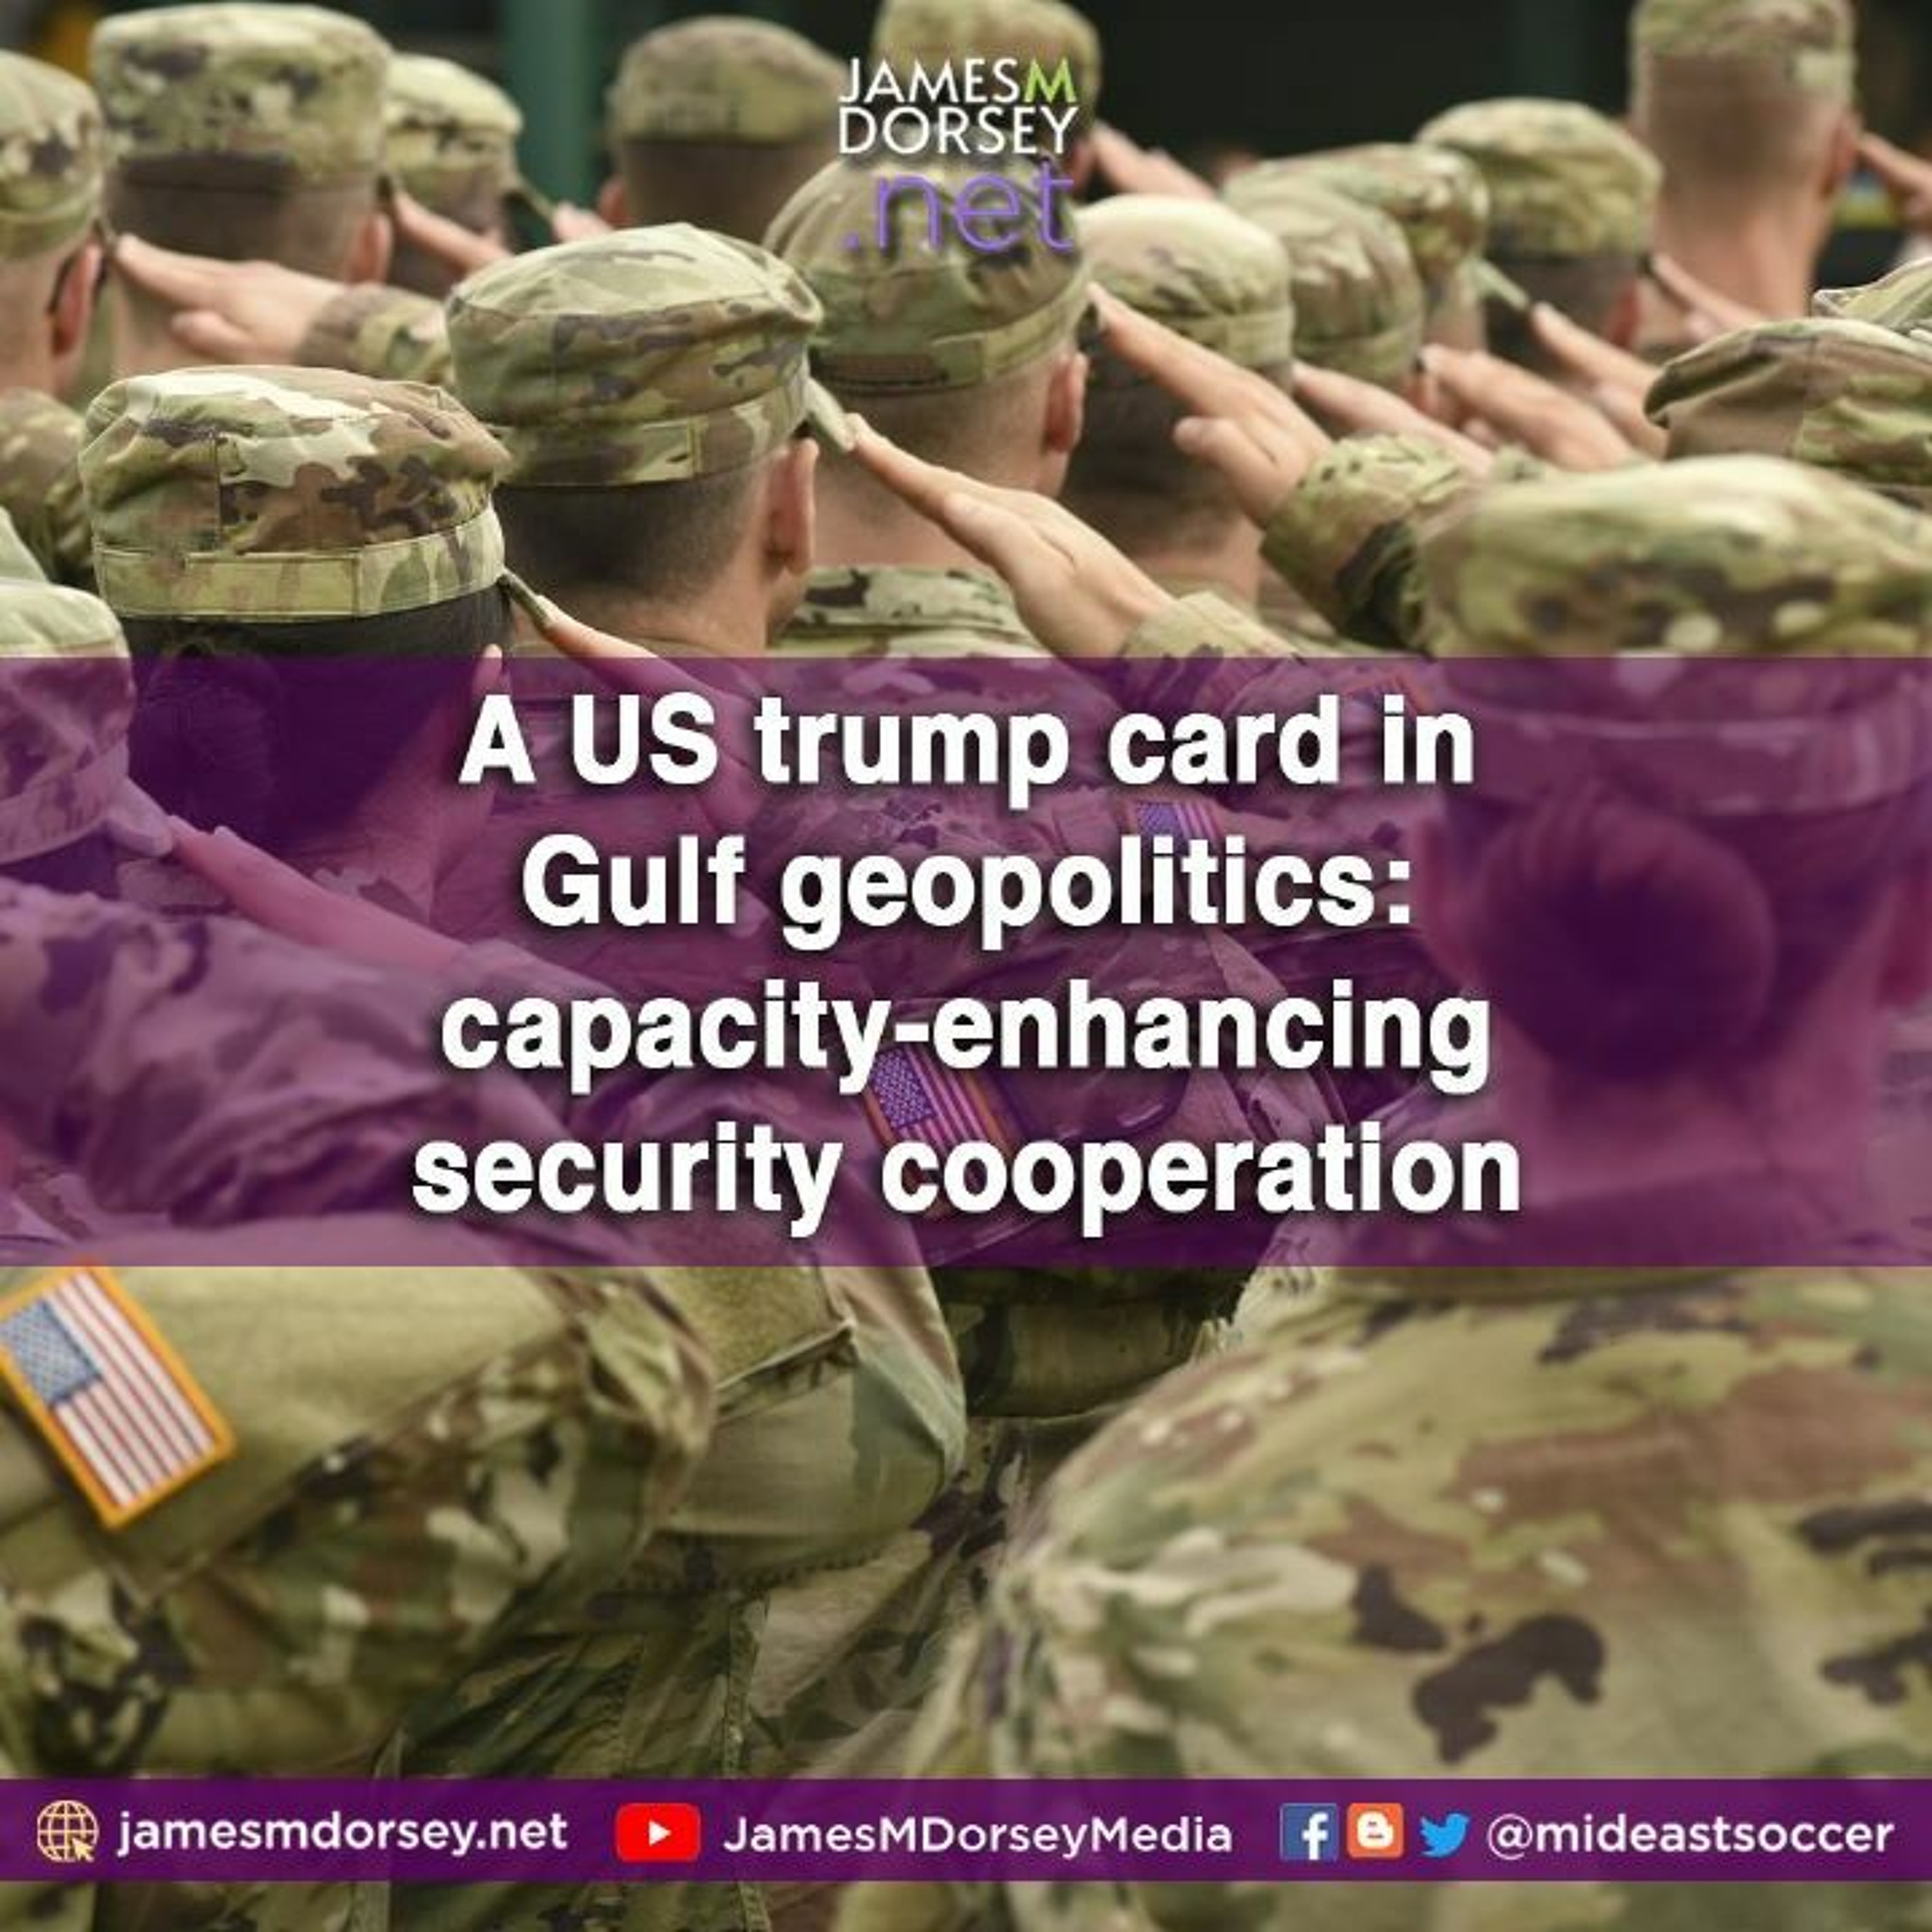 A US Trump Card In Gulf Geopolitics Capacity - Enhancing Security Cooperation